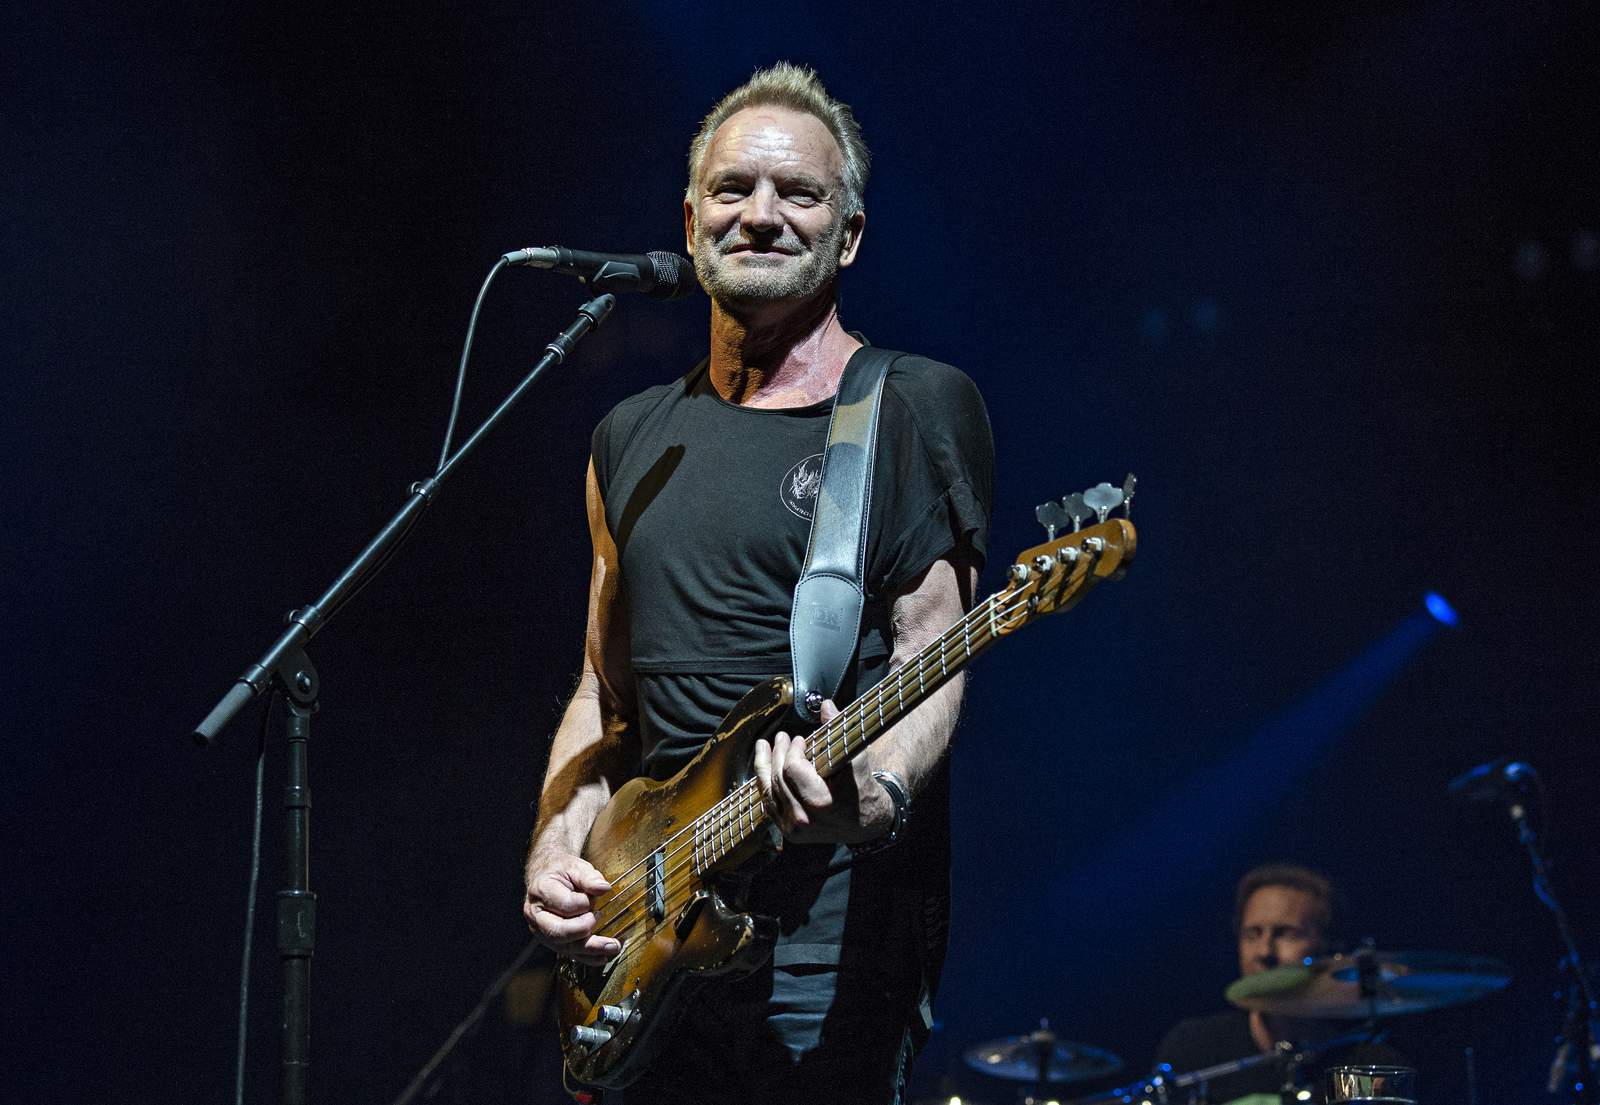 Sotheby’s offers benefit auction with Sting, Hillary Clinton